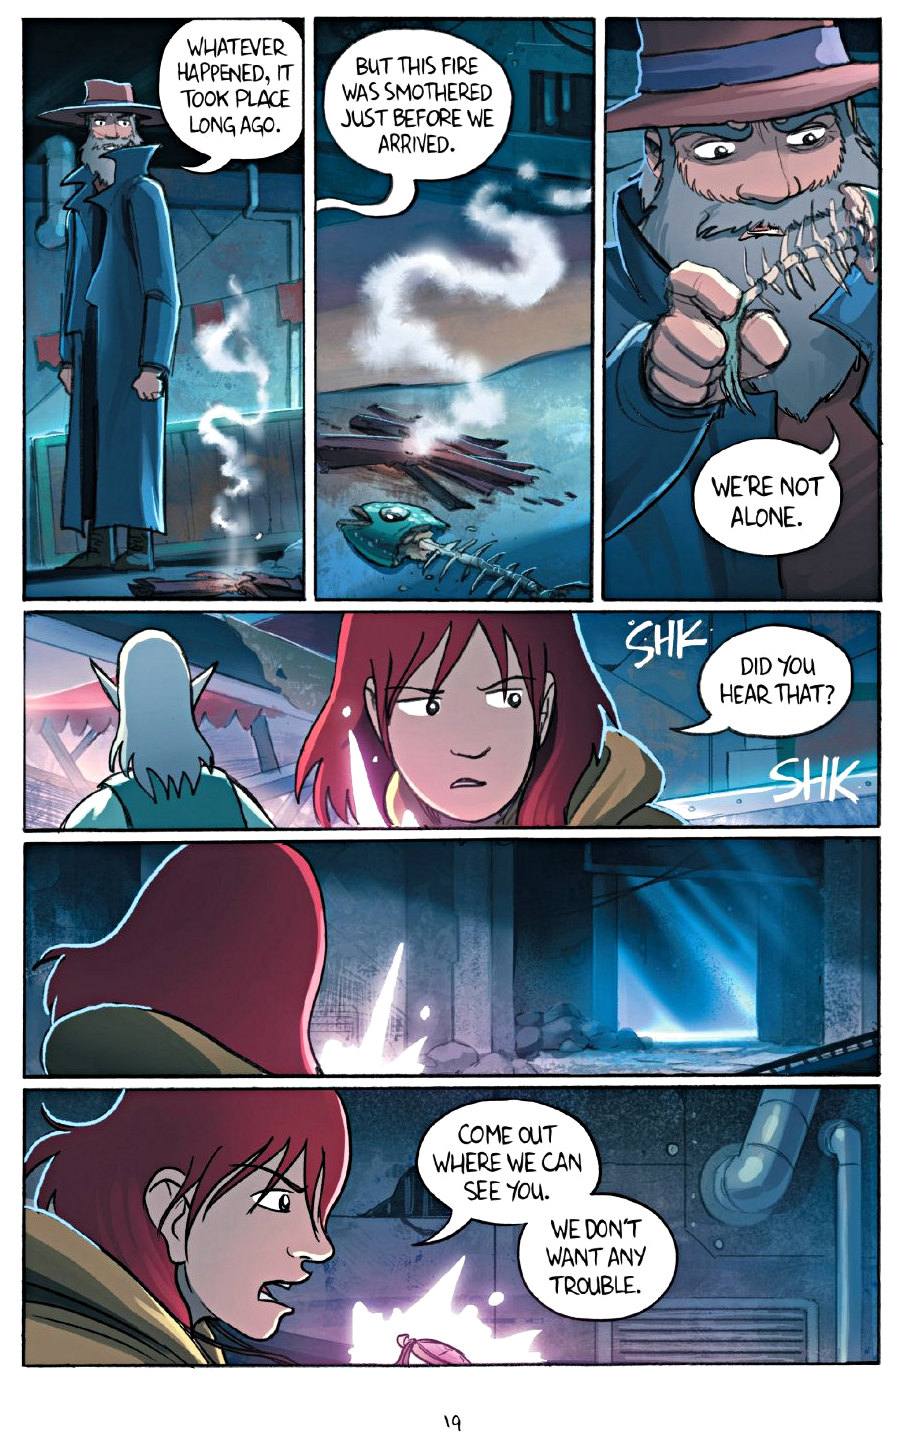 page 19 of amulet 7 firelight graphic novel